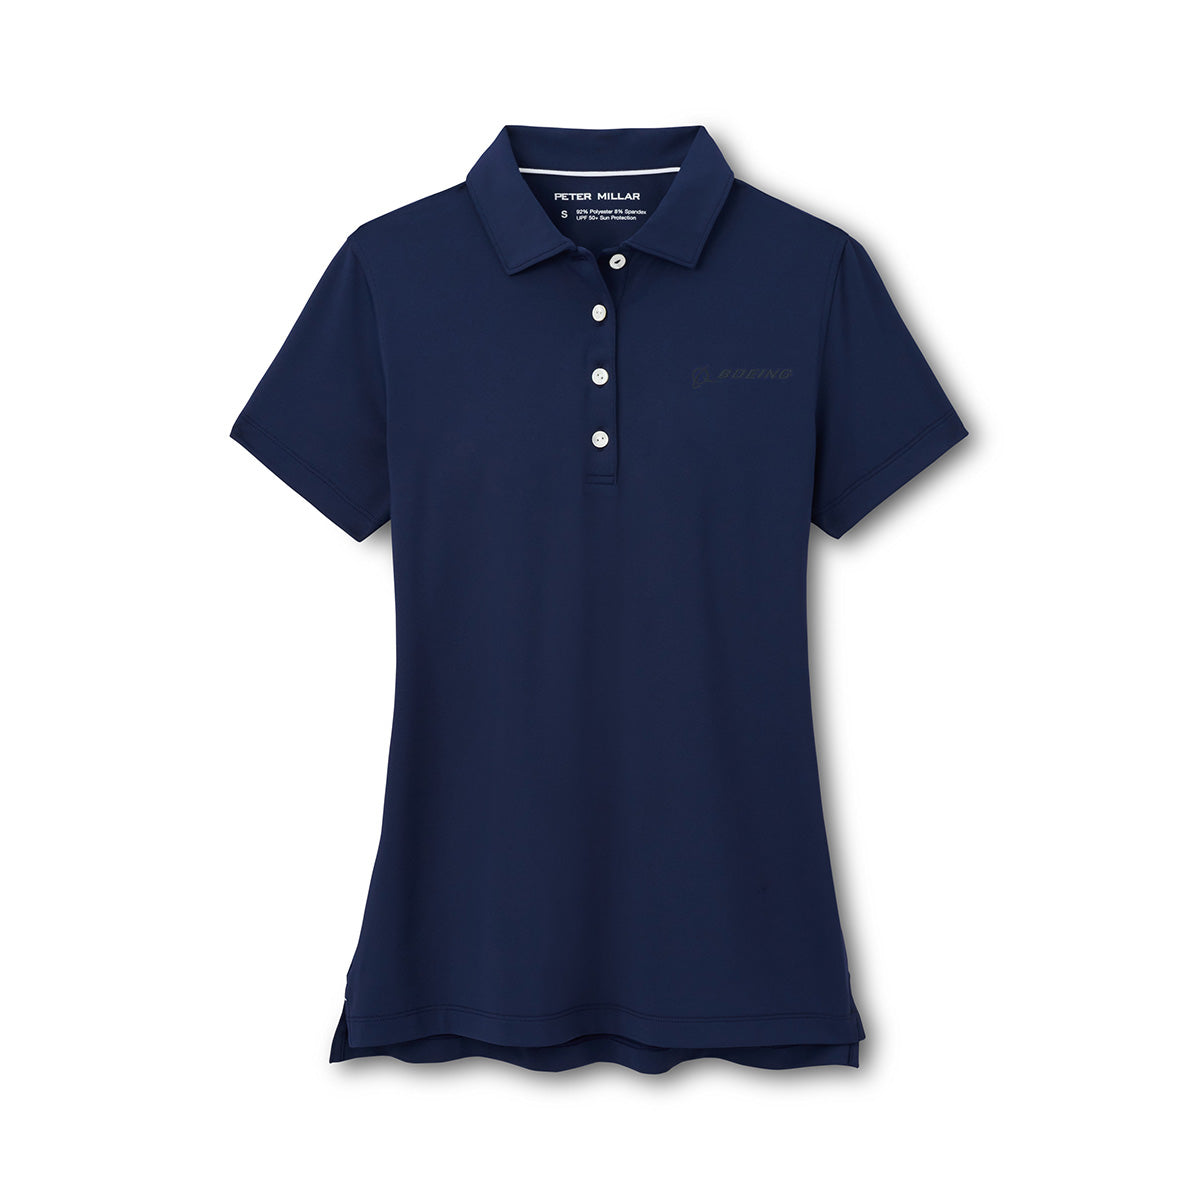 Full product image of the polo in a navy color. Navy Boeing signature logo on left chest. Featuring 4 buttons.